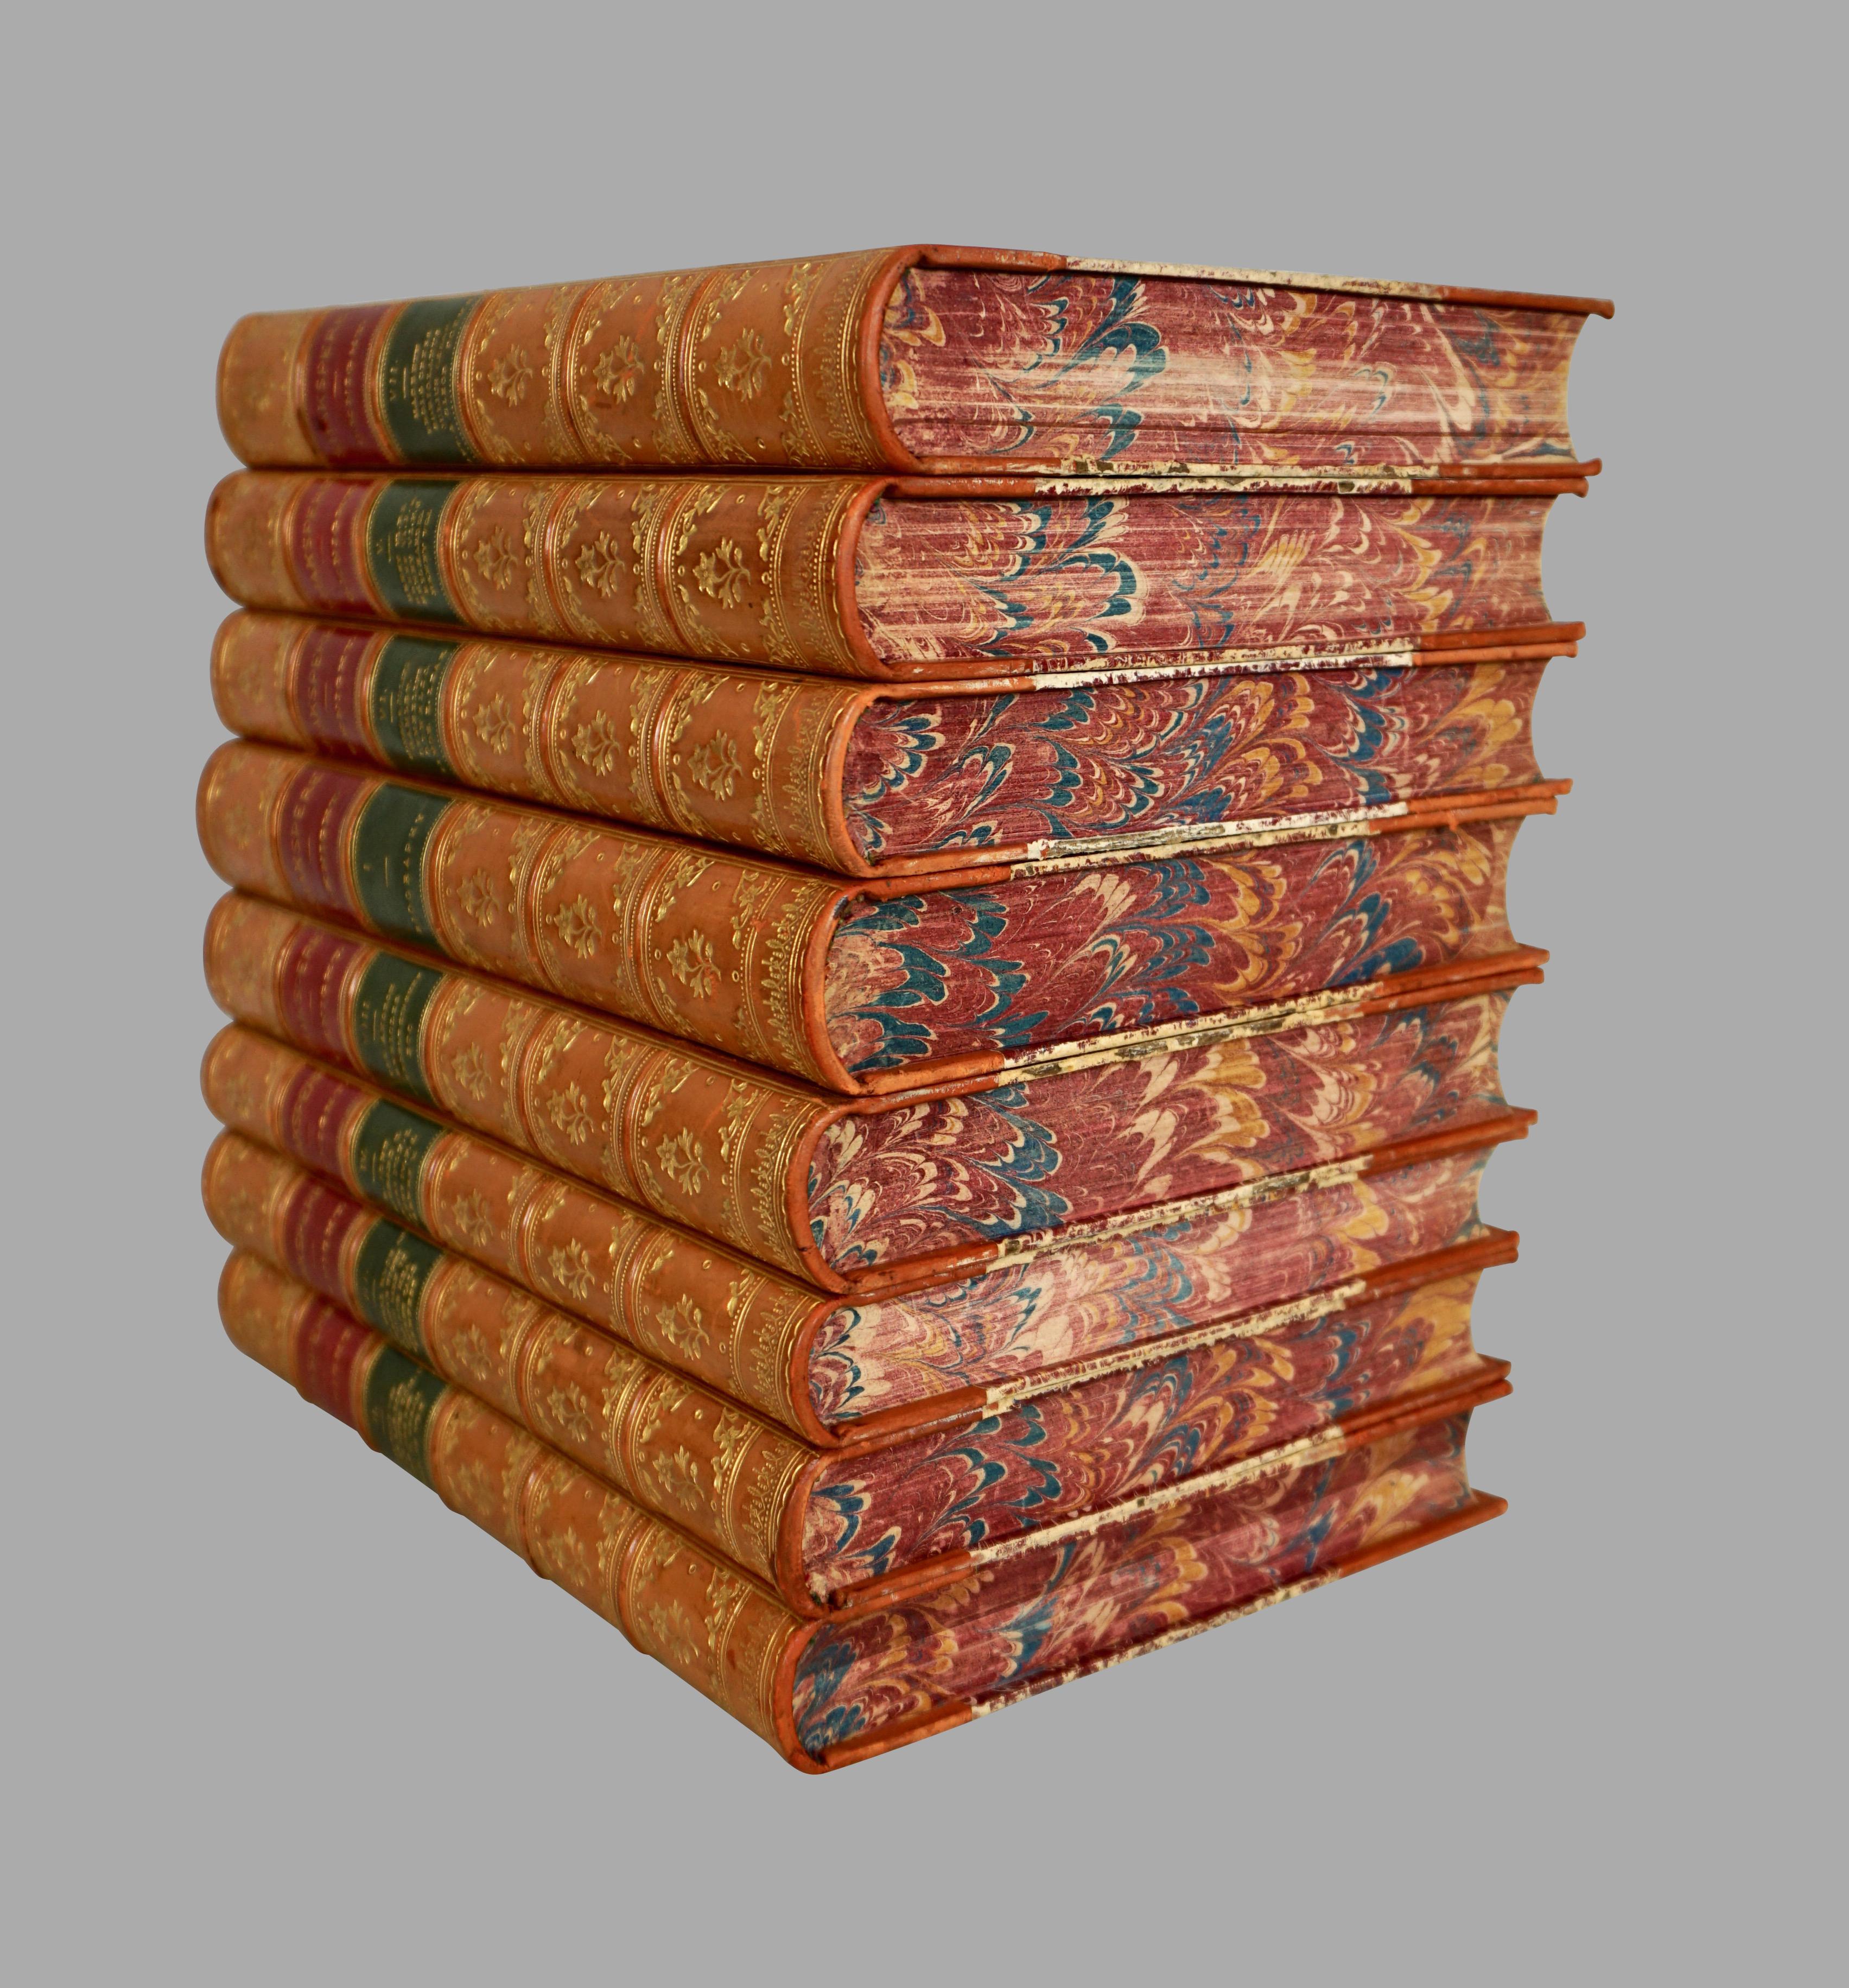 A very attractive 8 volume 3/4 leather bound set of the pictorial edition of the works of Shakespere (sic), the second revised edition published New York: George Routledge and Sons. The boards and end papers decorated with marbleized paper with